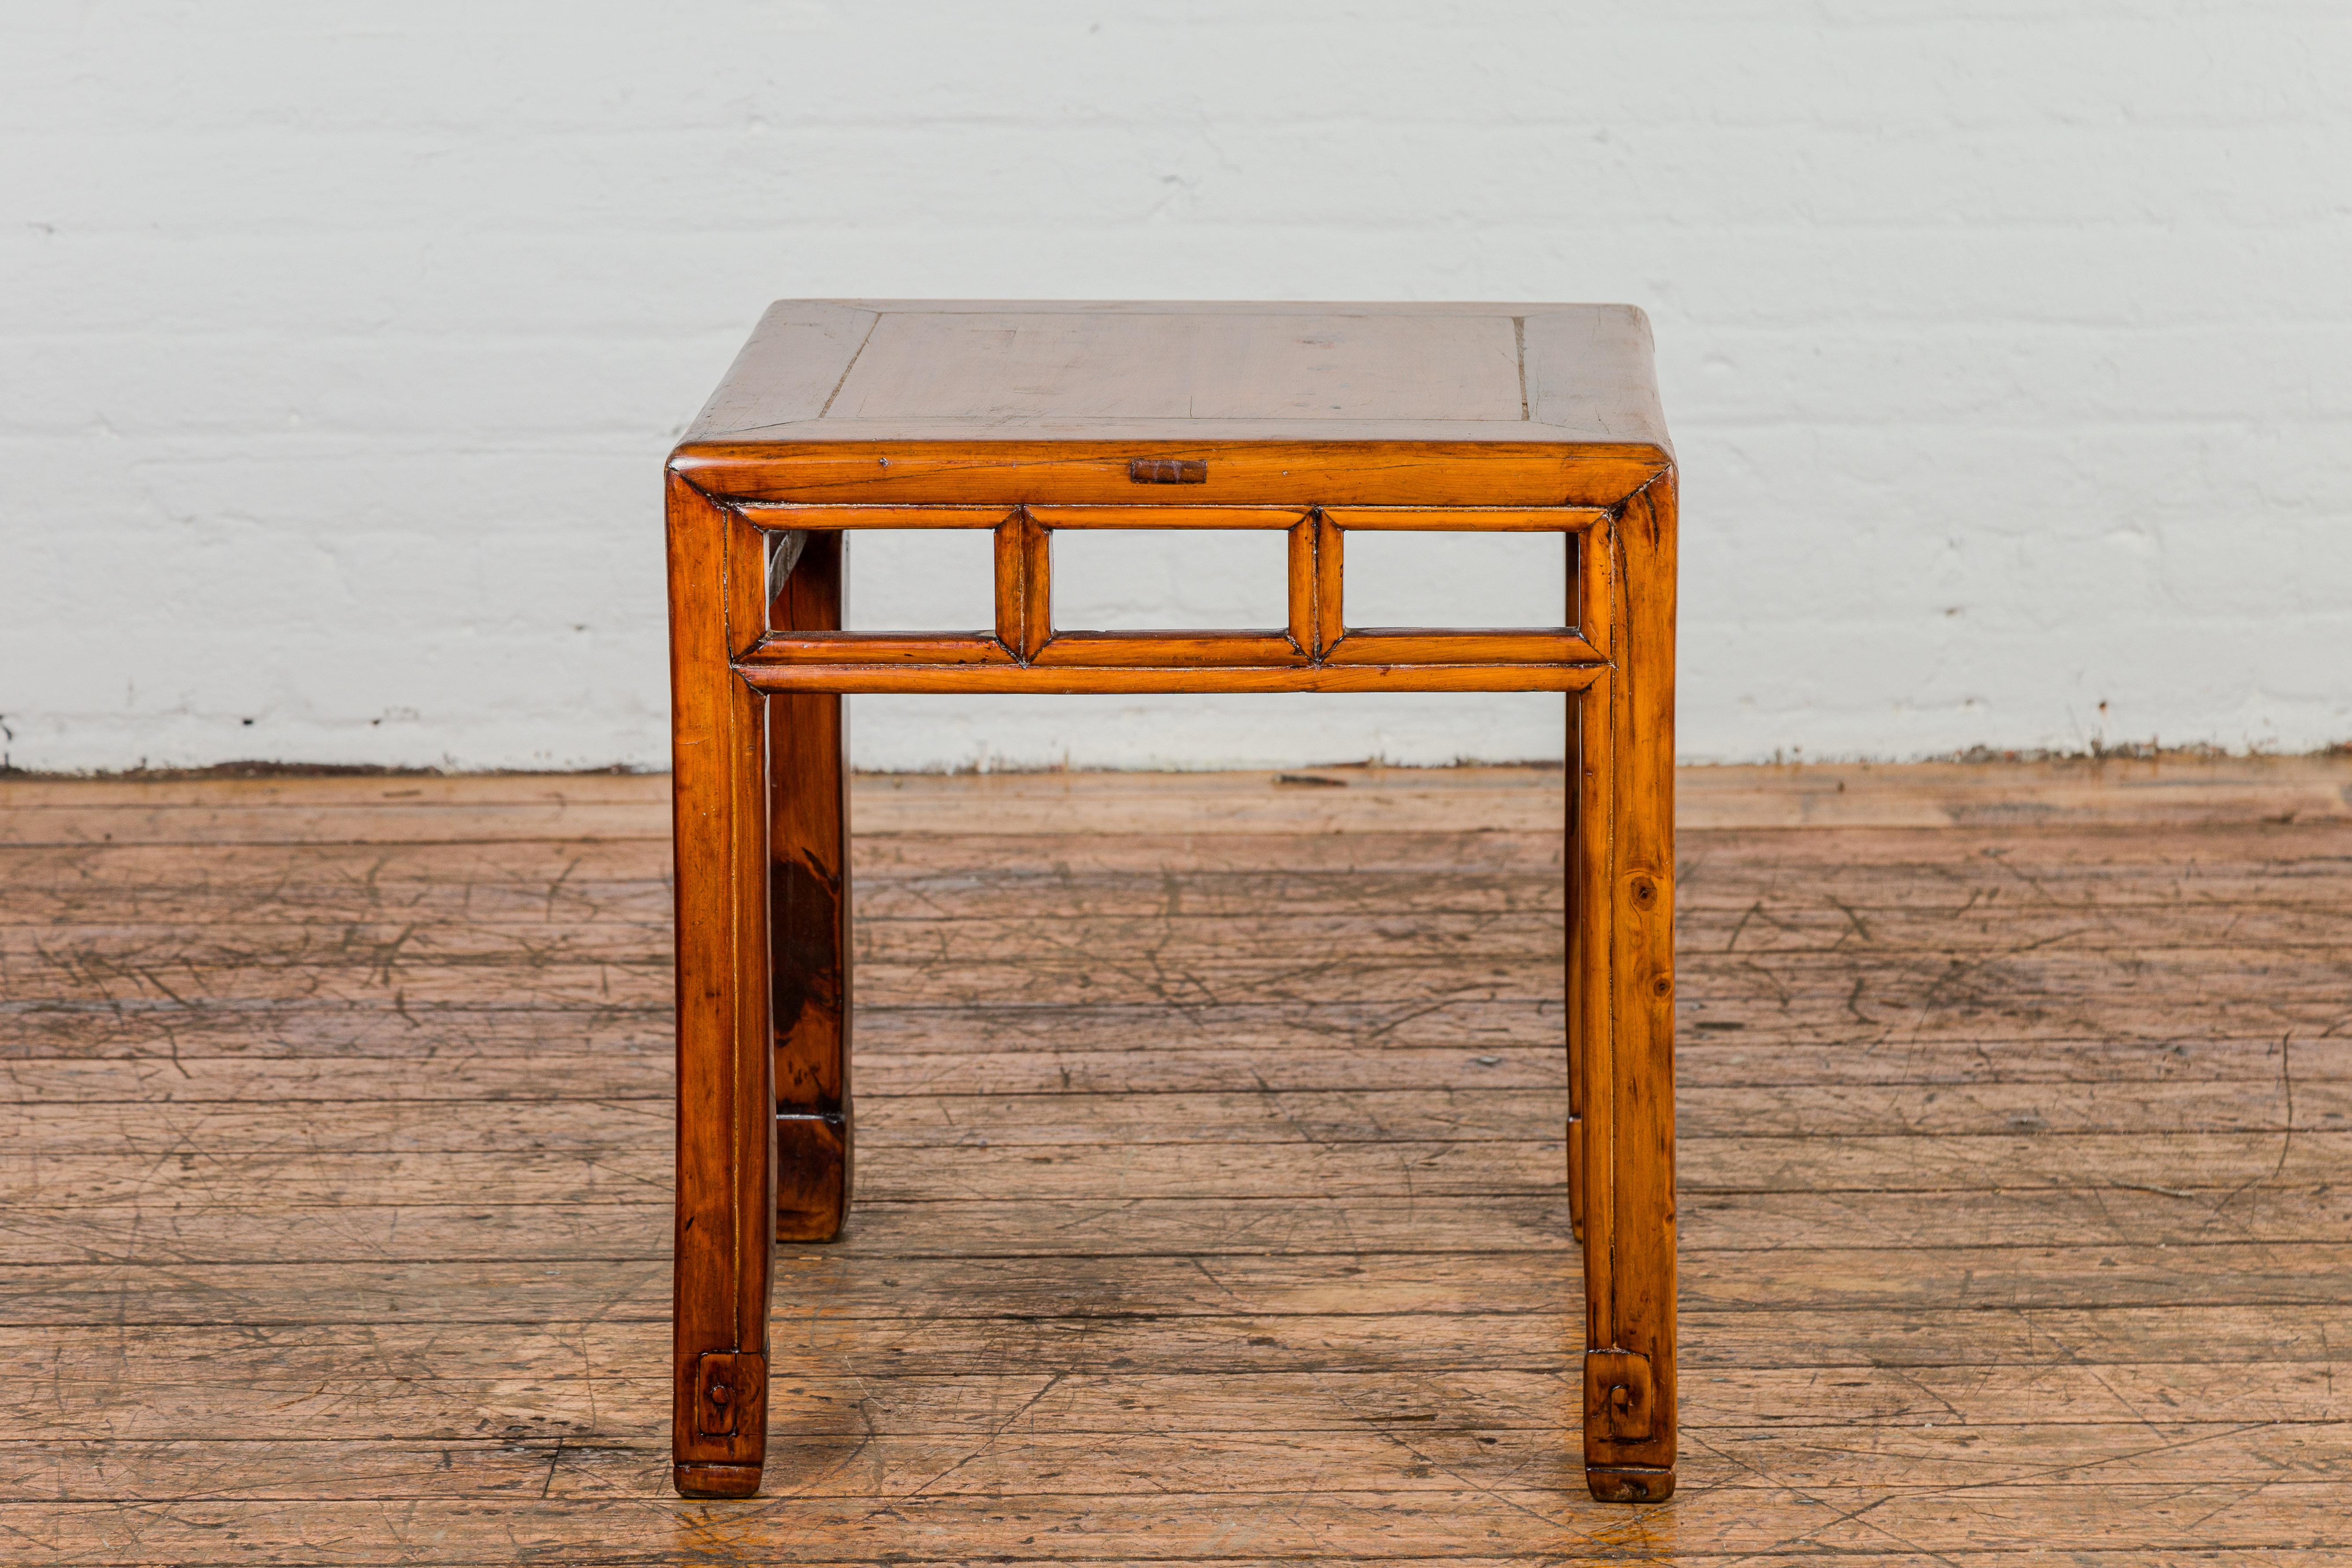 Late Qing Dynasty Period Side Table with Pillar Strut Motifs and Scroll Feet For Sale 6